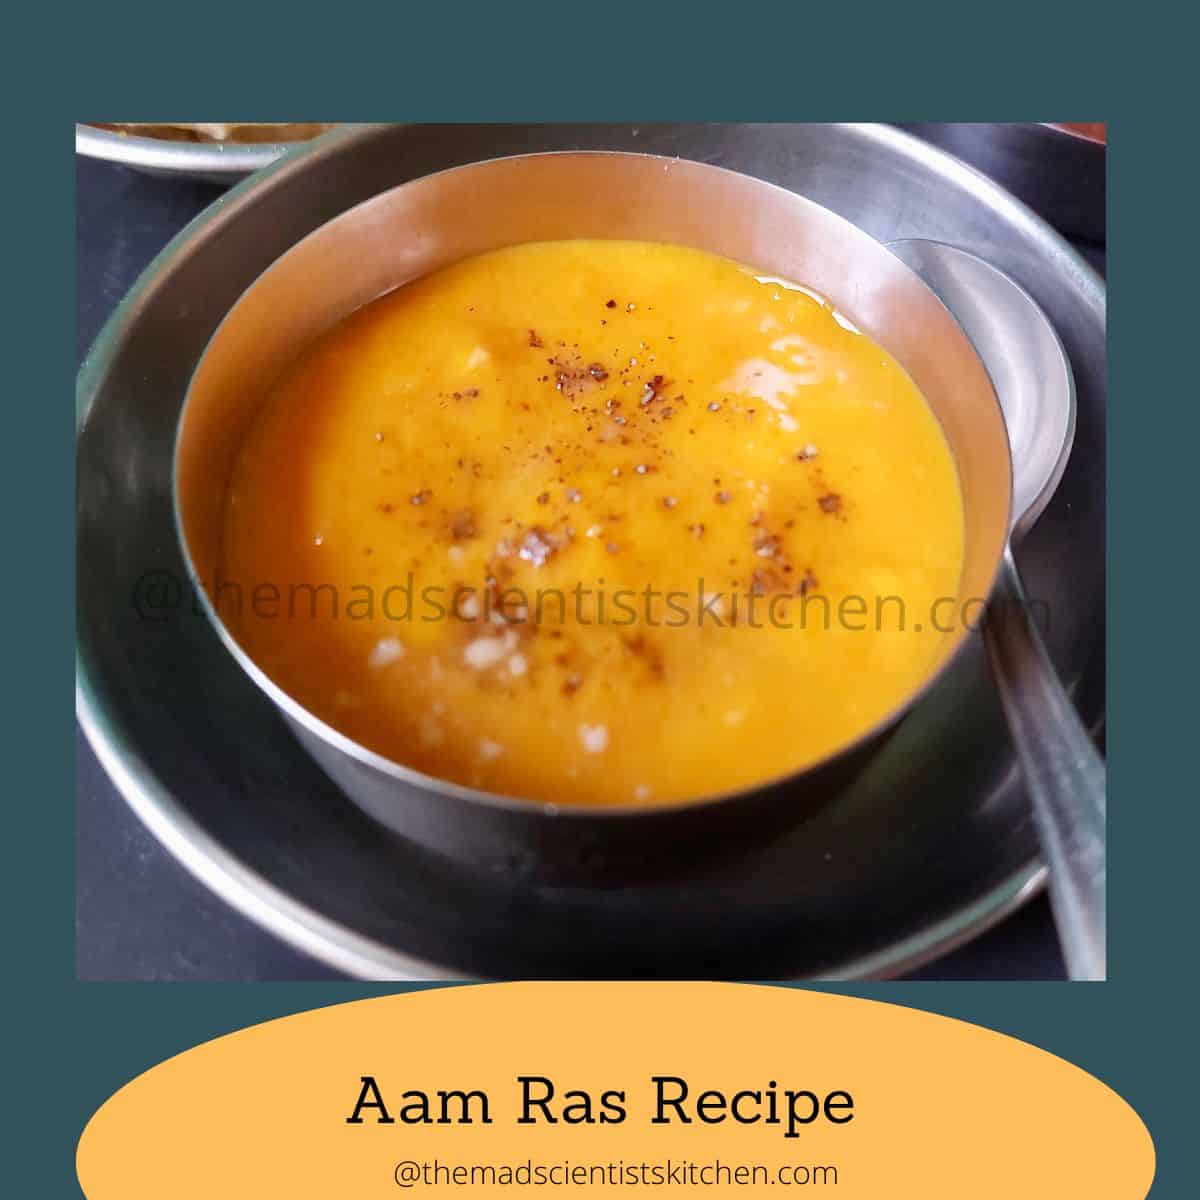 The traditional Indian side dish and dessert Aam Ras served with green cardamon powder sprinkled on top.